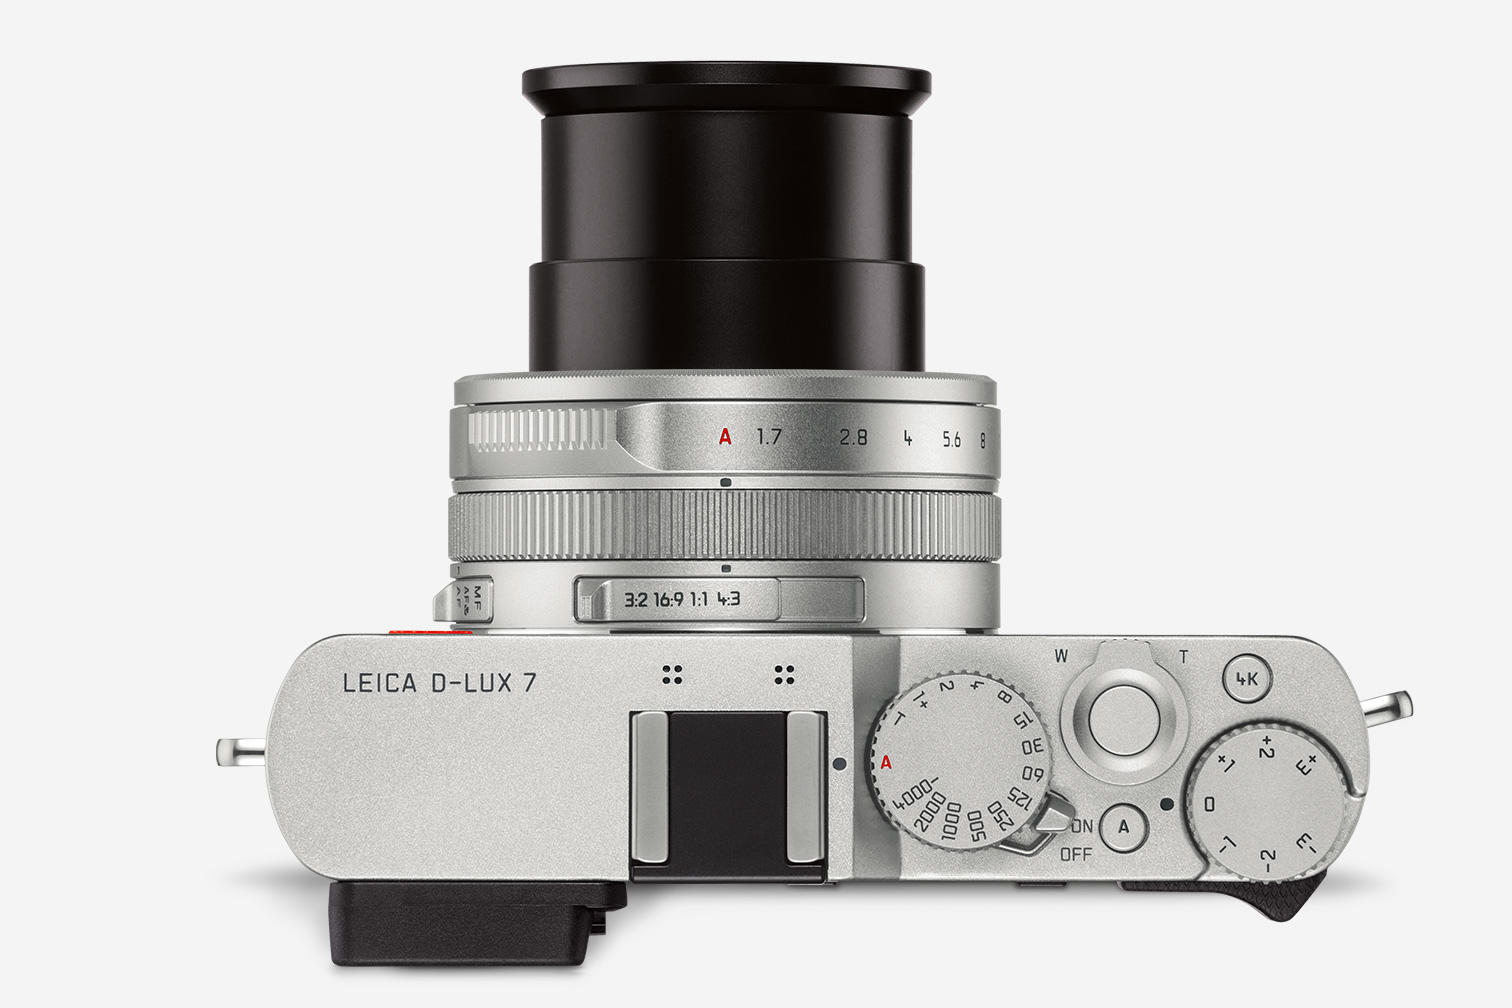 Leica-D-Lux-7-top-|-1512x1008-BG-f4f4f4_reference